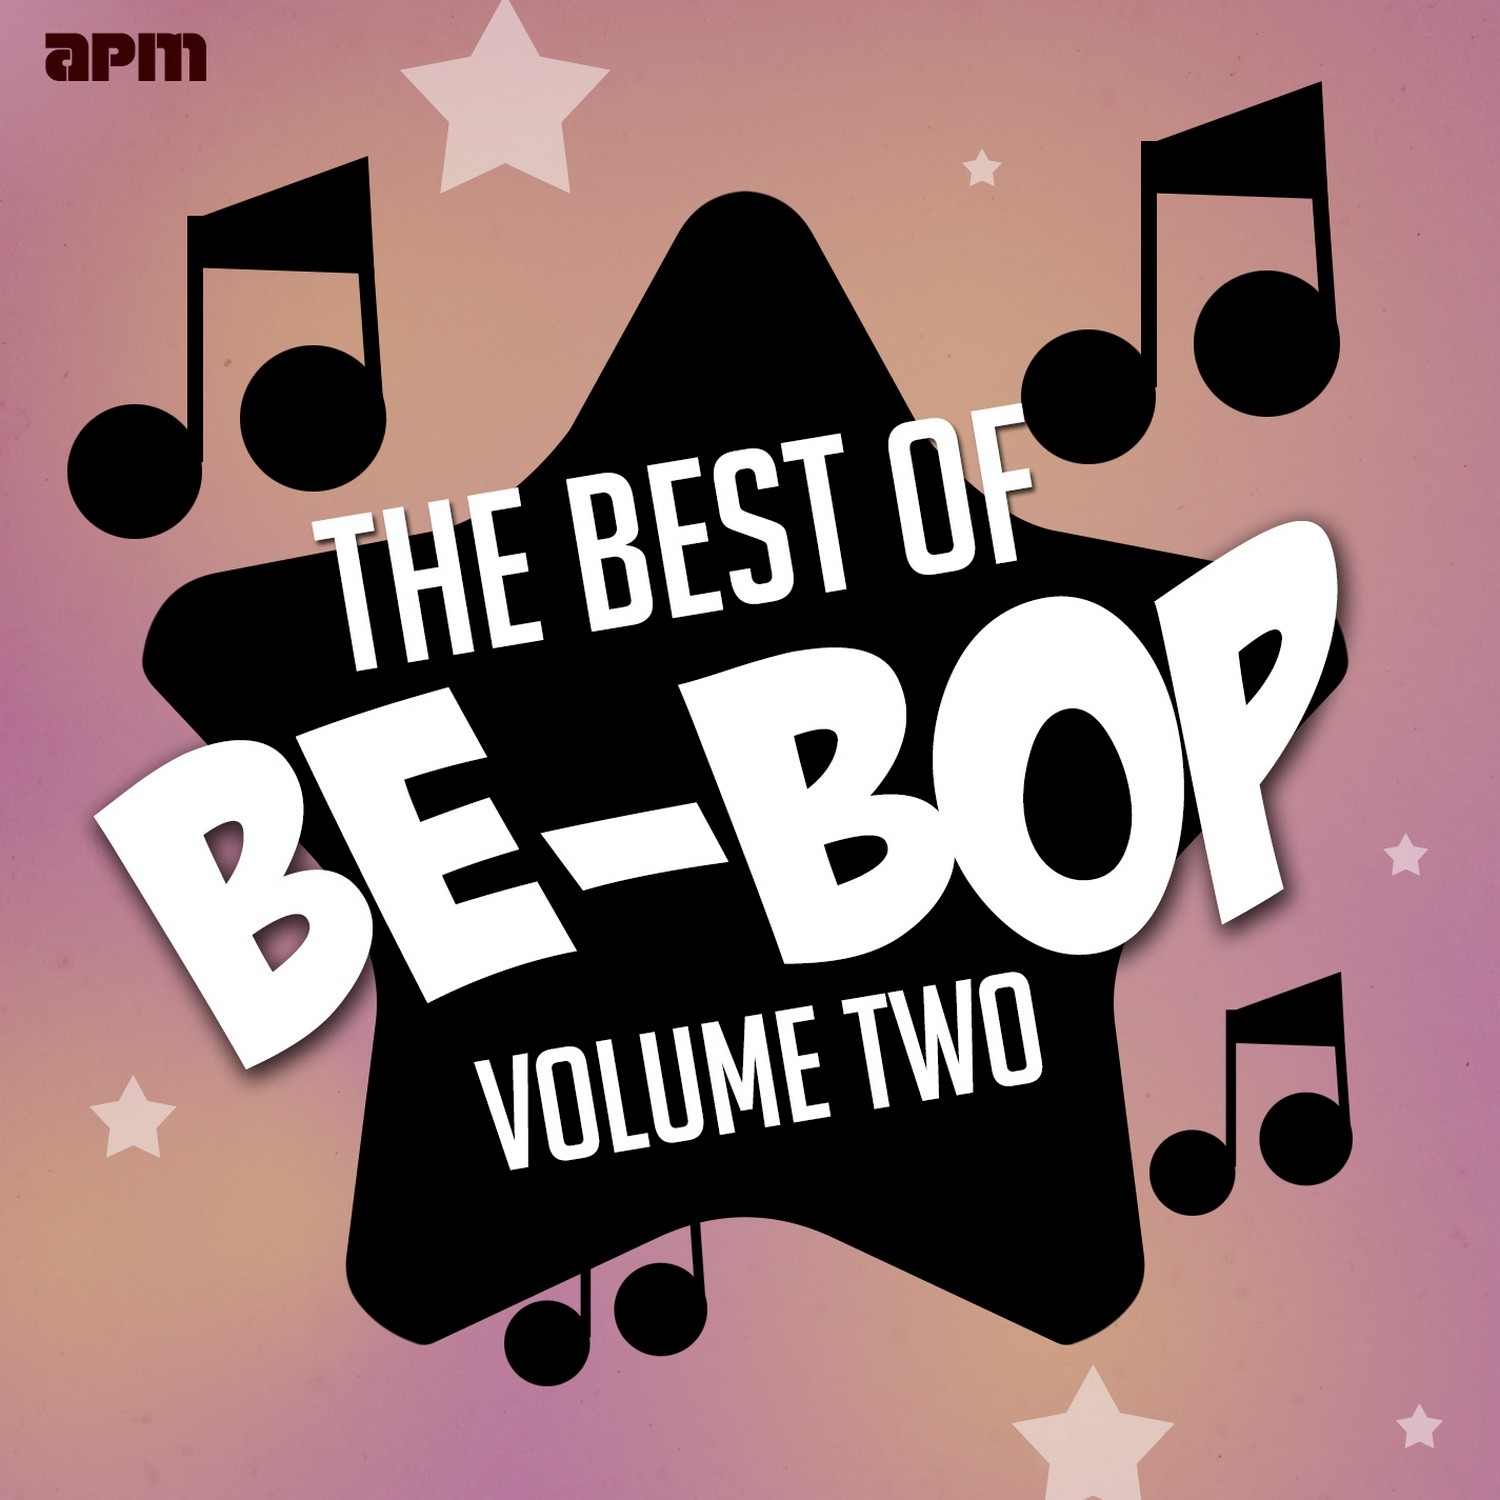 The Best of Be Bop, Vol. 2